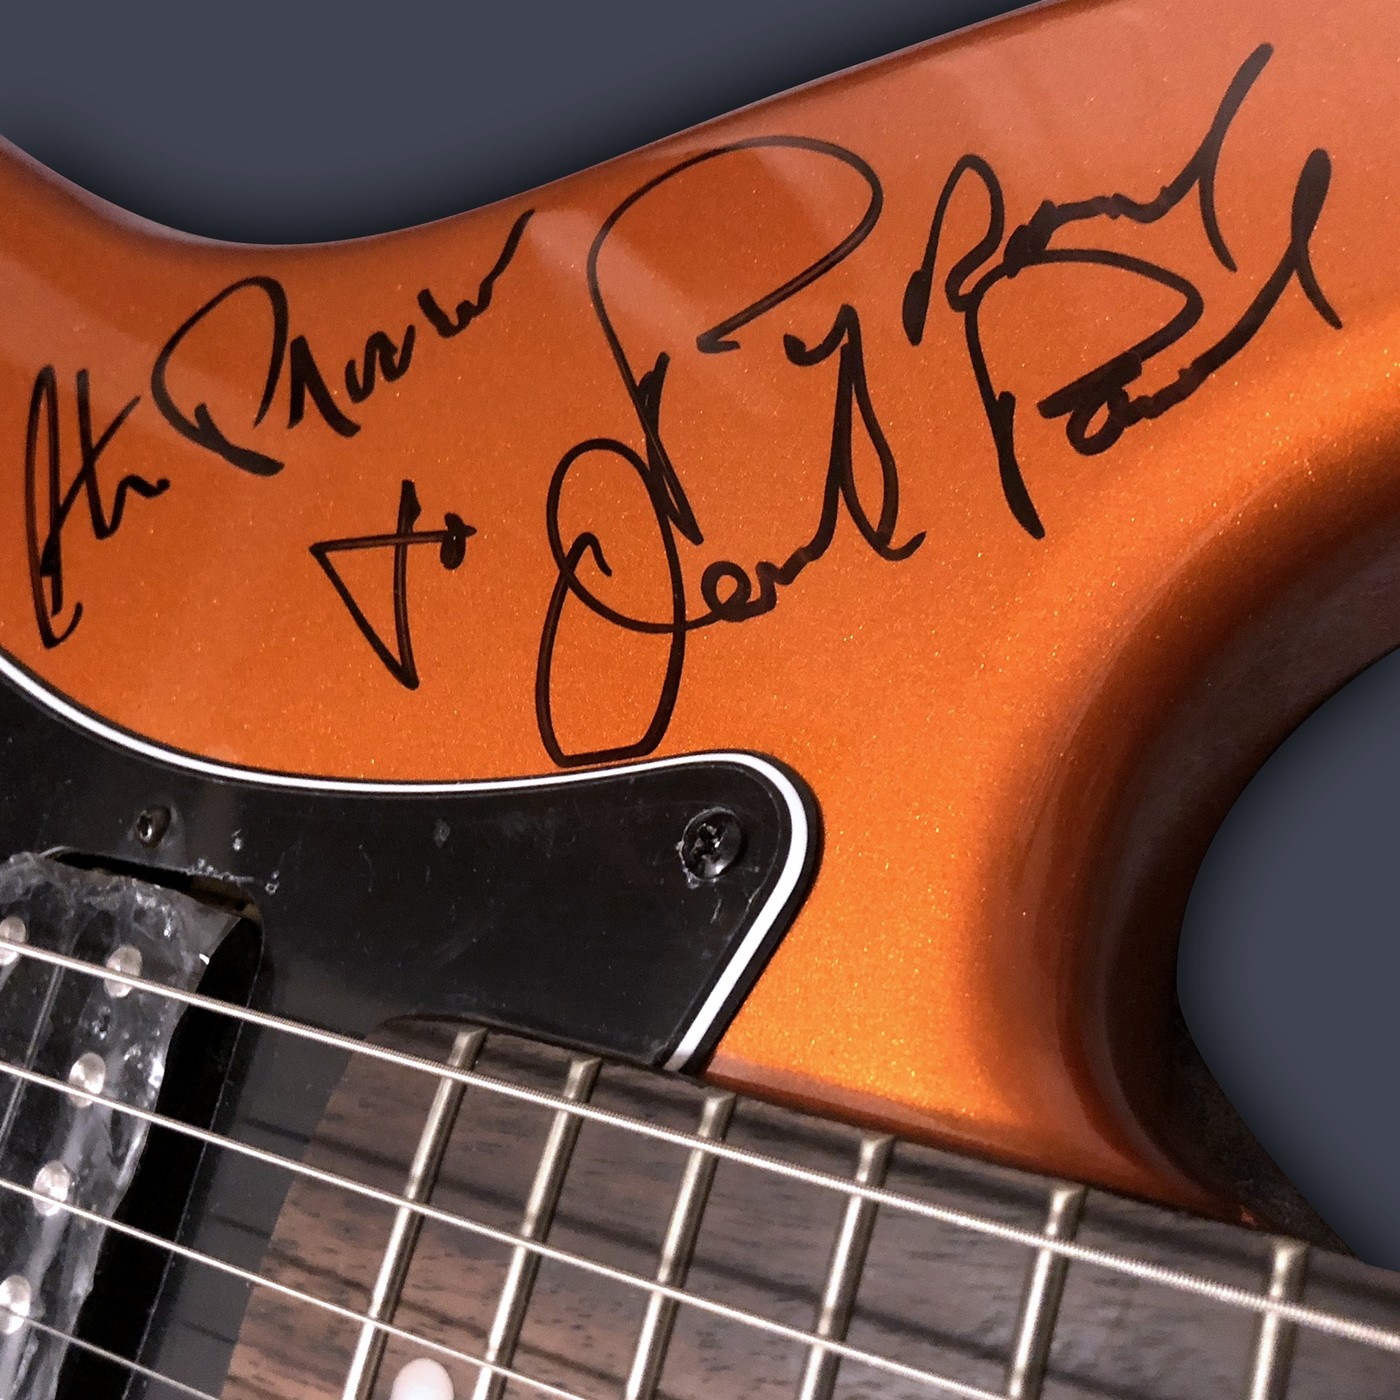 Toto Signed Fender Squier Guitar Collectionzz